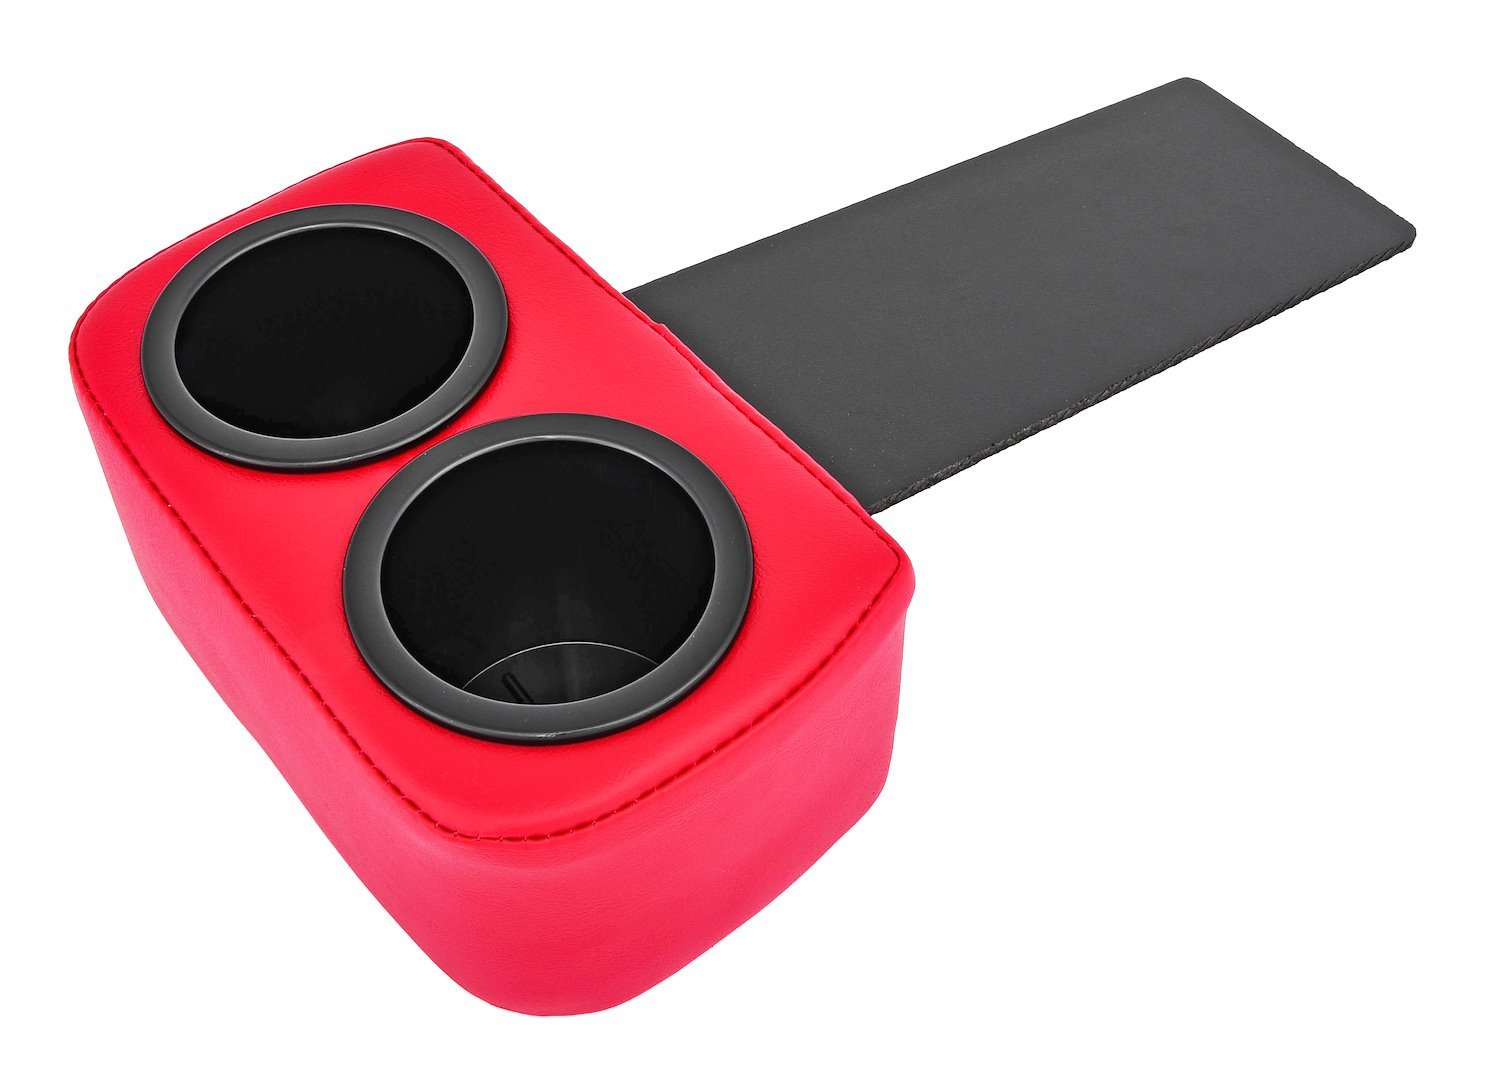 Classic Drink Holder Insert for 1968-1969 Chevrolet Chevelle, El Camino [Bright Red]